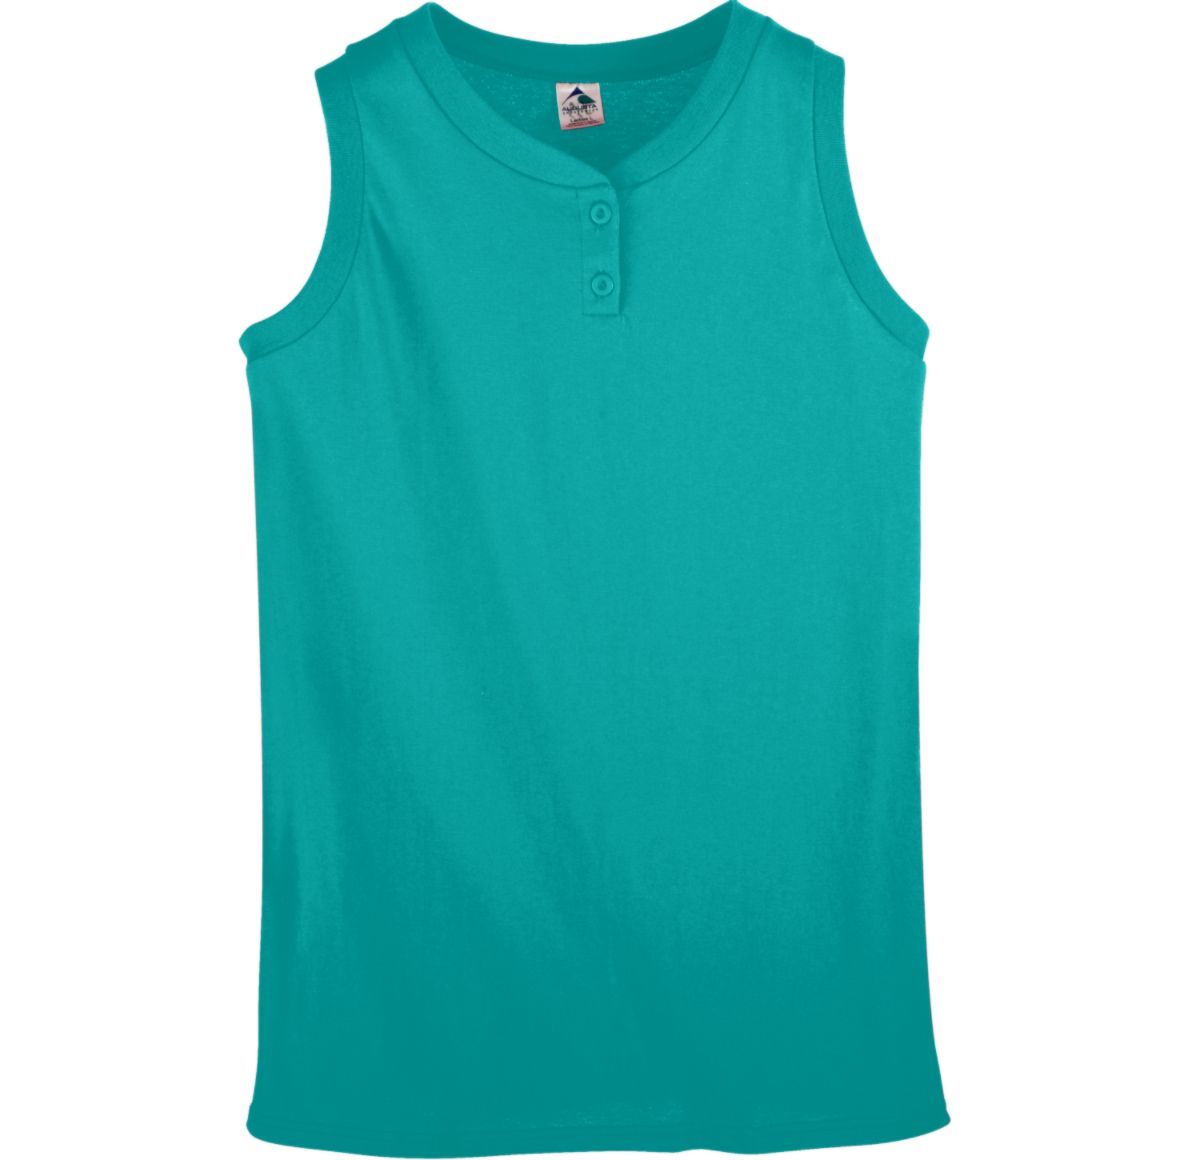 Augusta Sportswear Girls Sleeveless Two-Button Softball Jersey in Teal  -Part of the Girls, Augusta-Products, Softball, Girls-Jersey, Shirts product lines at KanaleyCreations.com